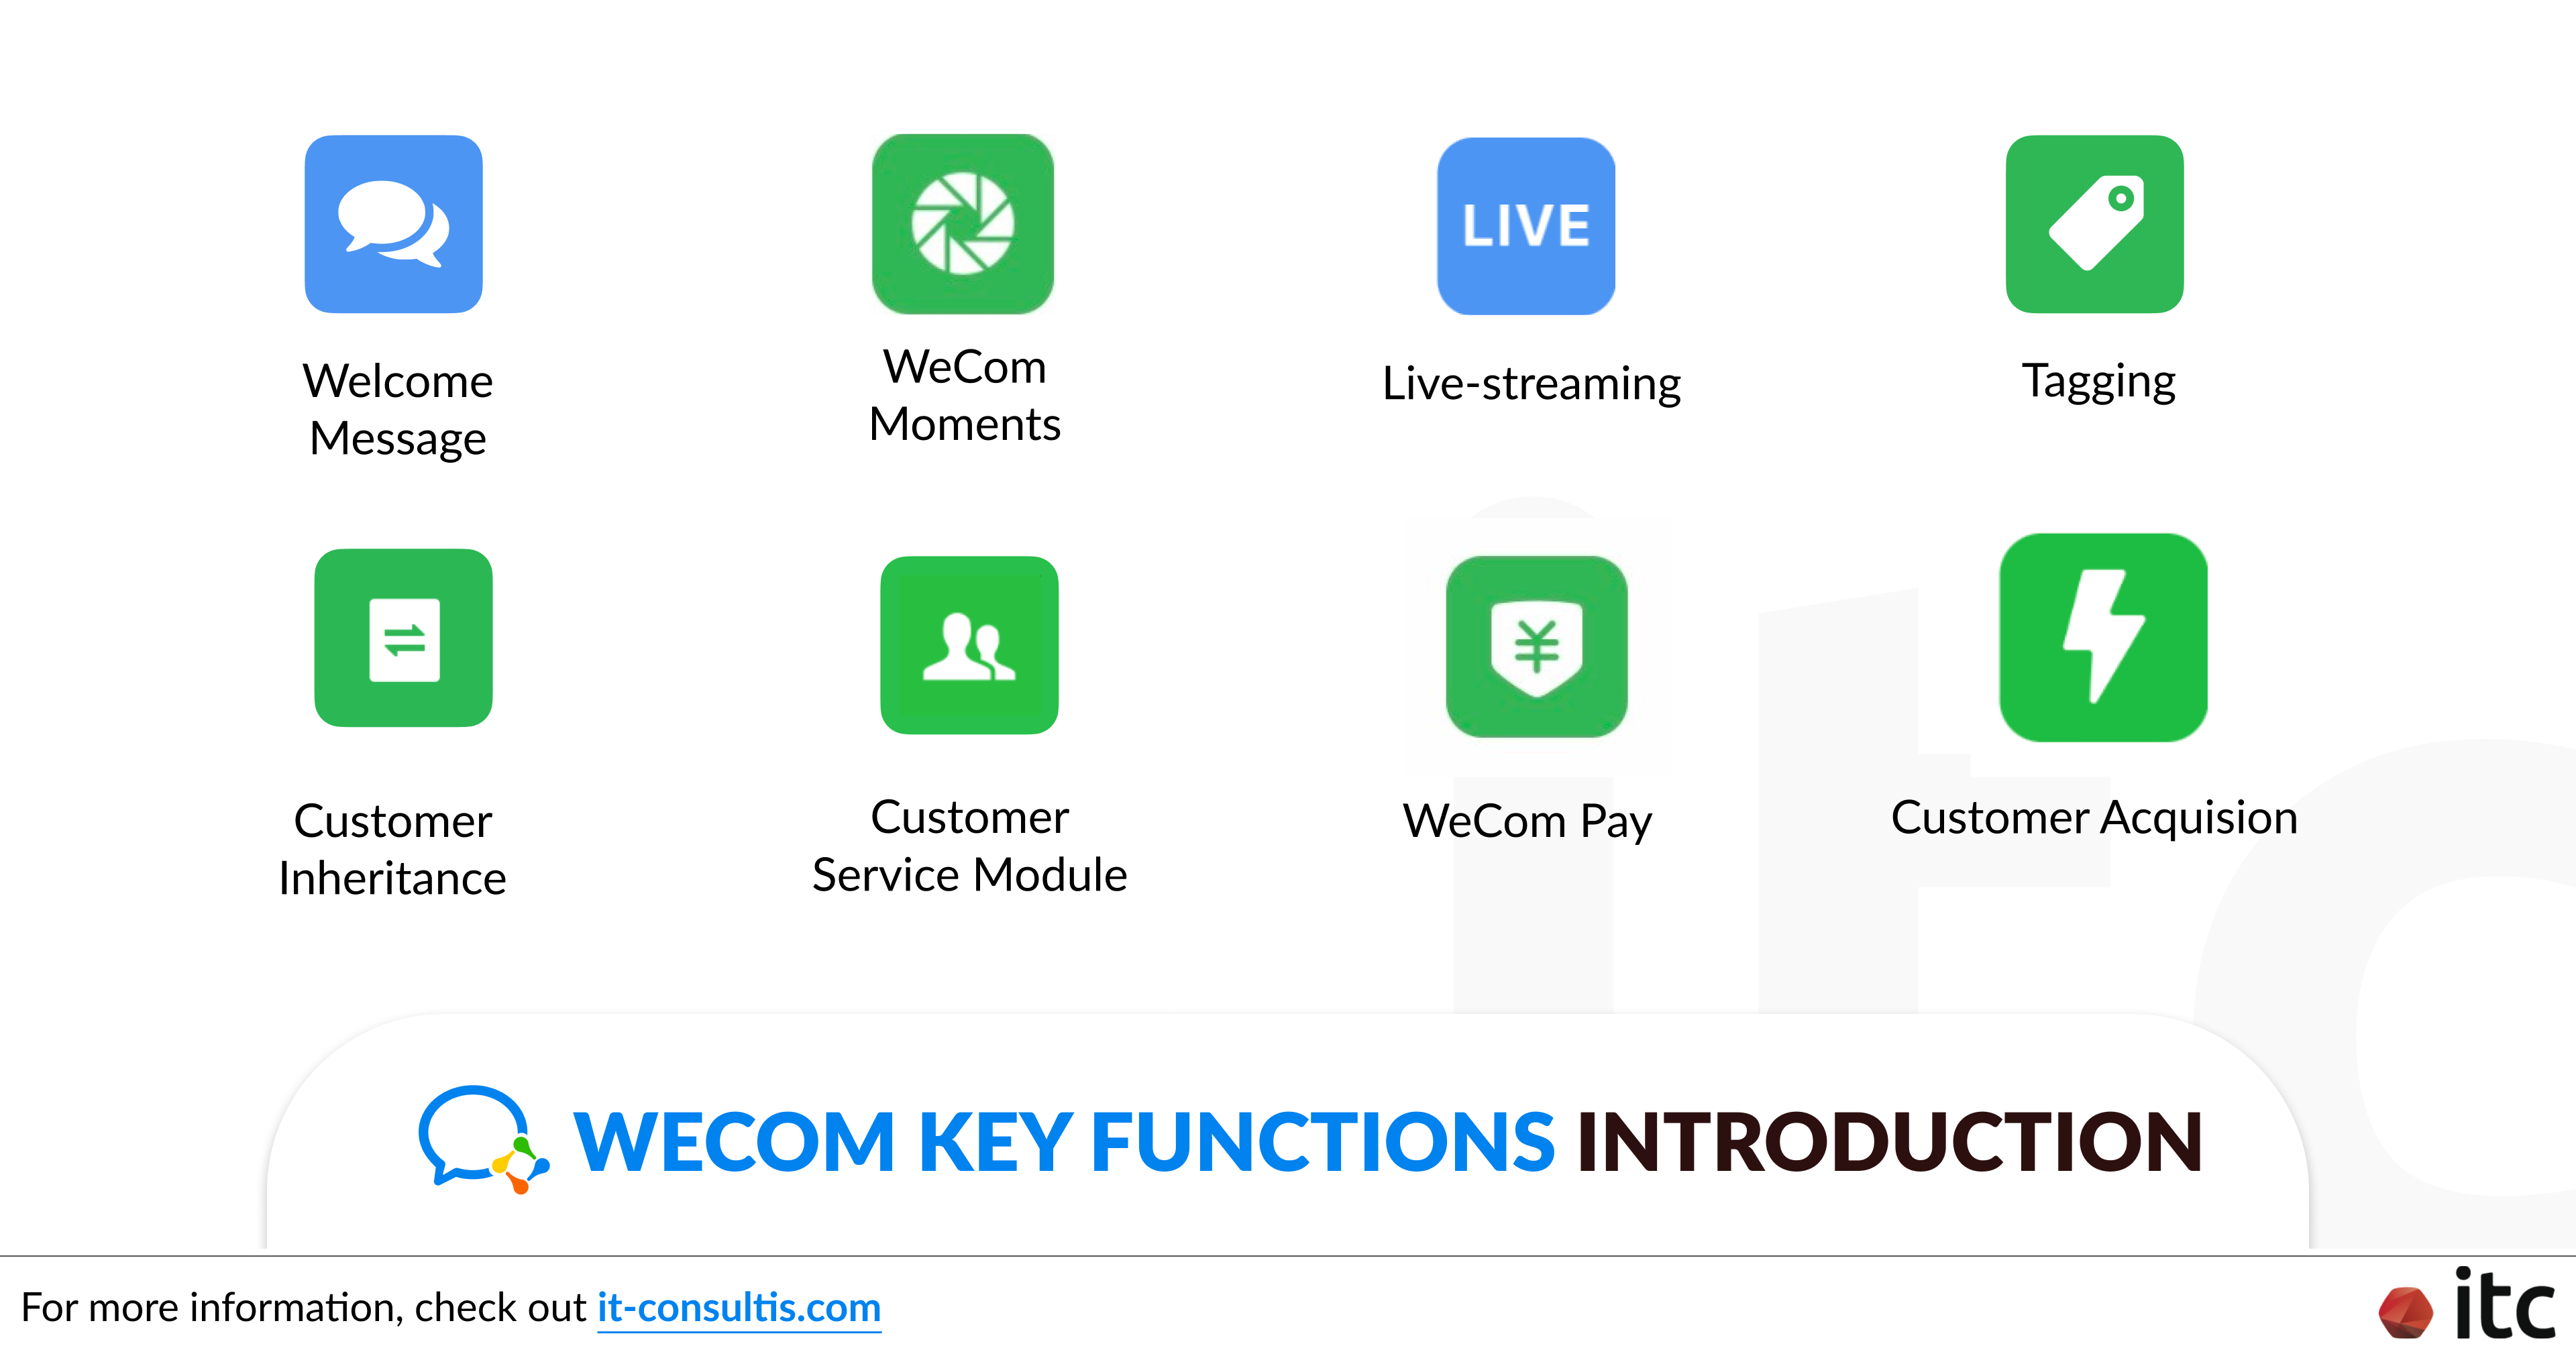 Introduction to the Key Functions of WeCom